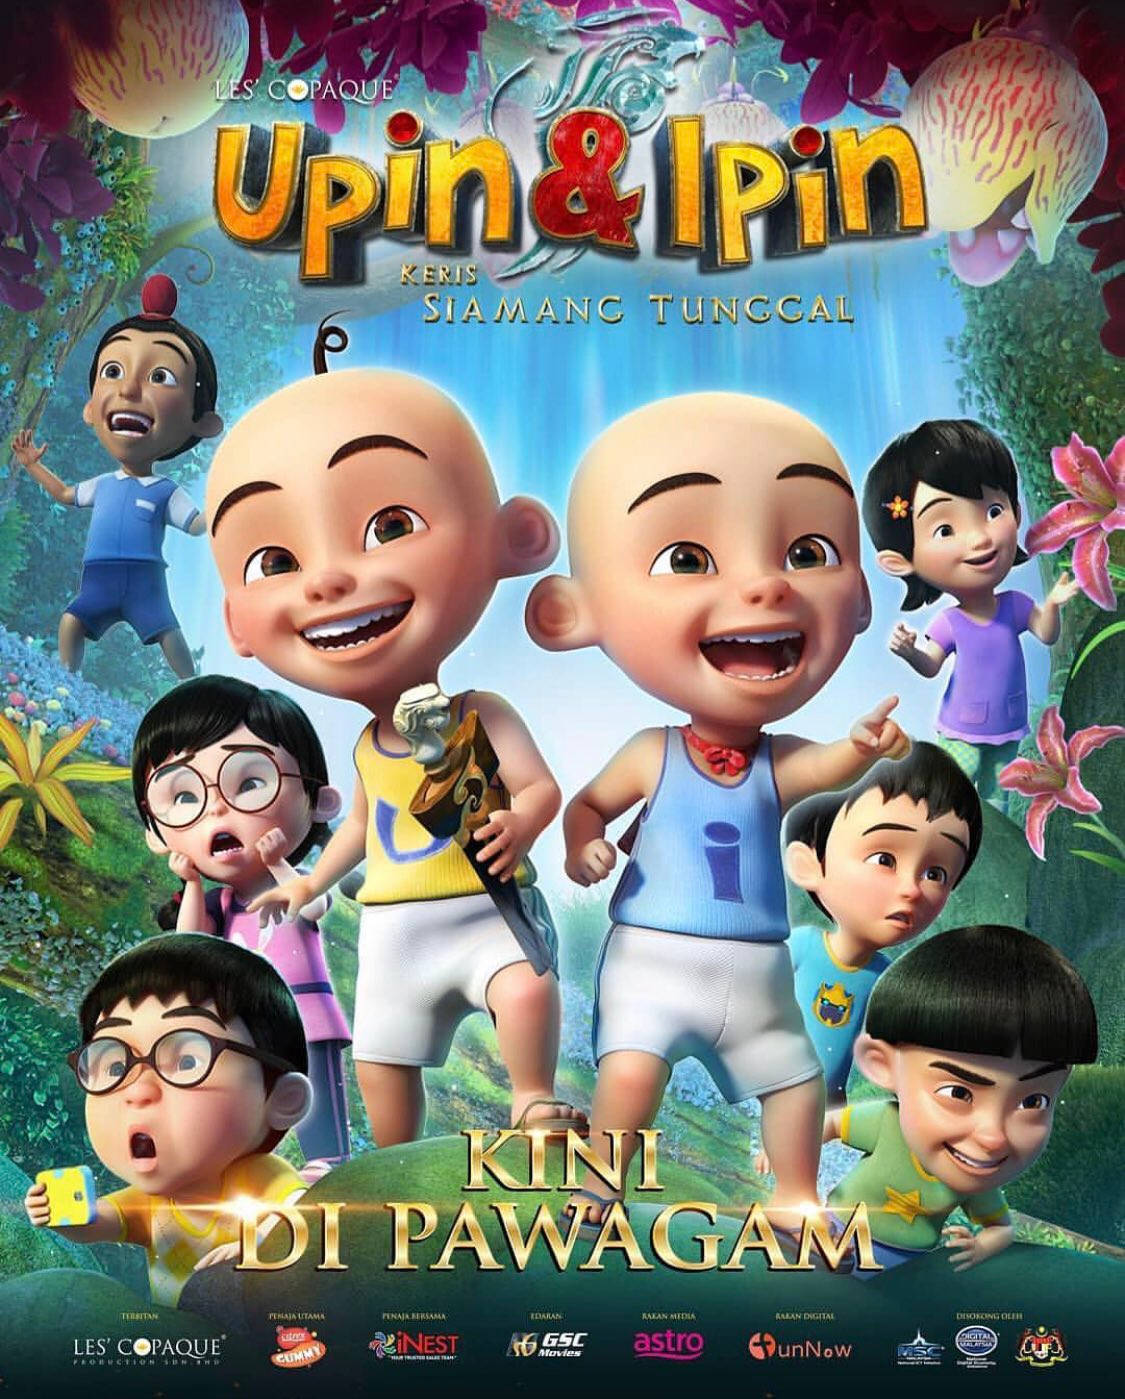 Awesome Upin Ipin Movie Poster